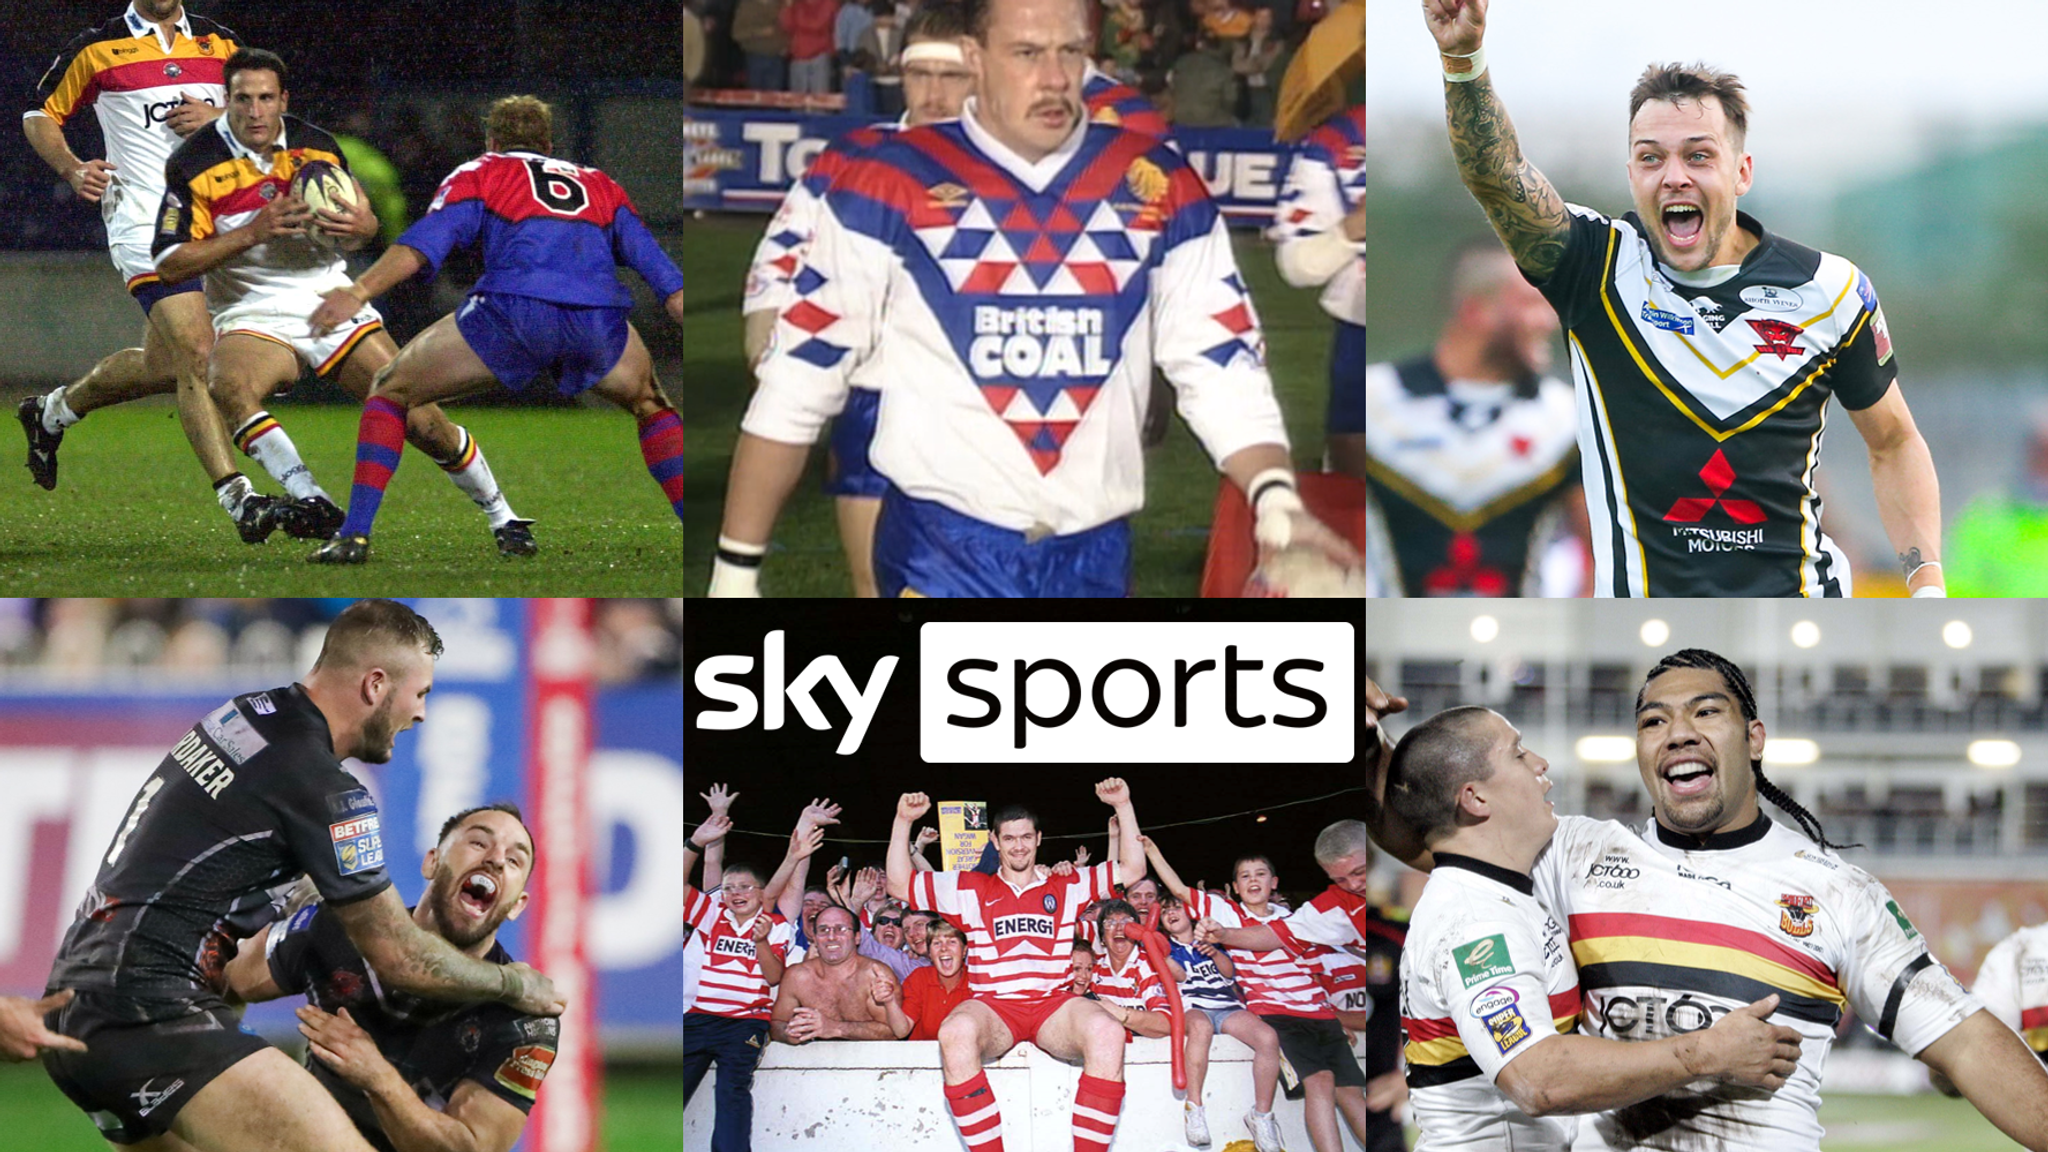 Sky Sports rugby league takeover What classic matches are on? Rugby League News Sky Sports